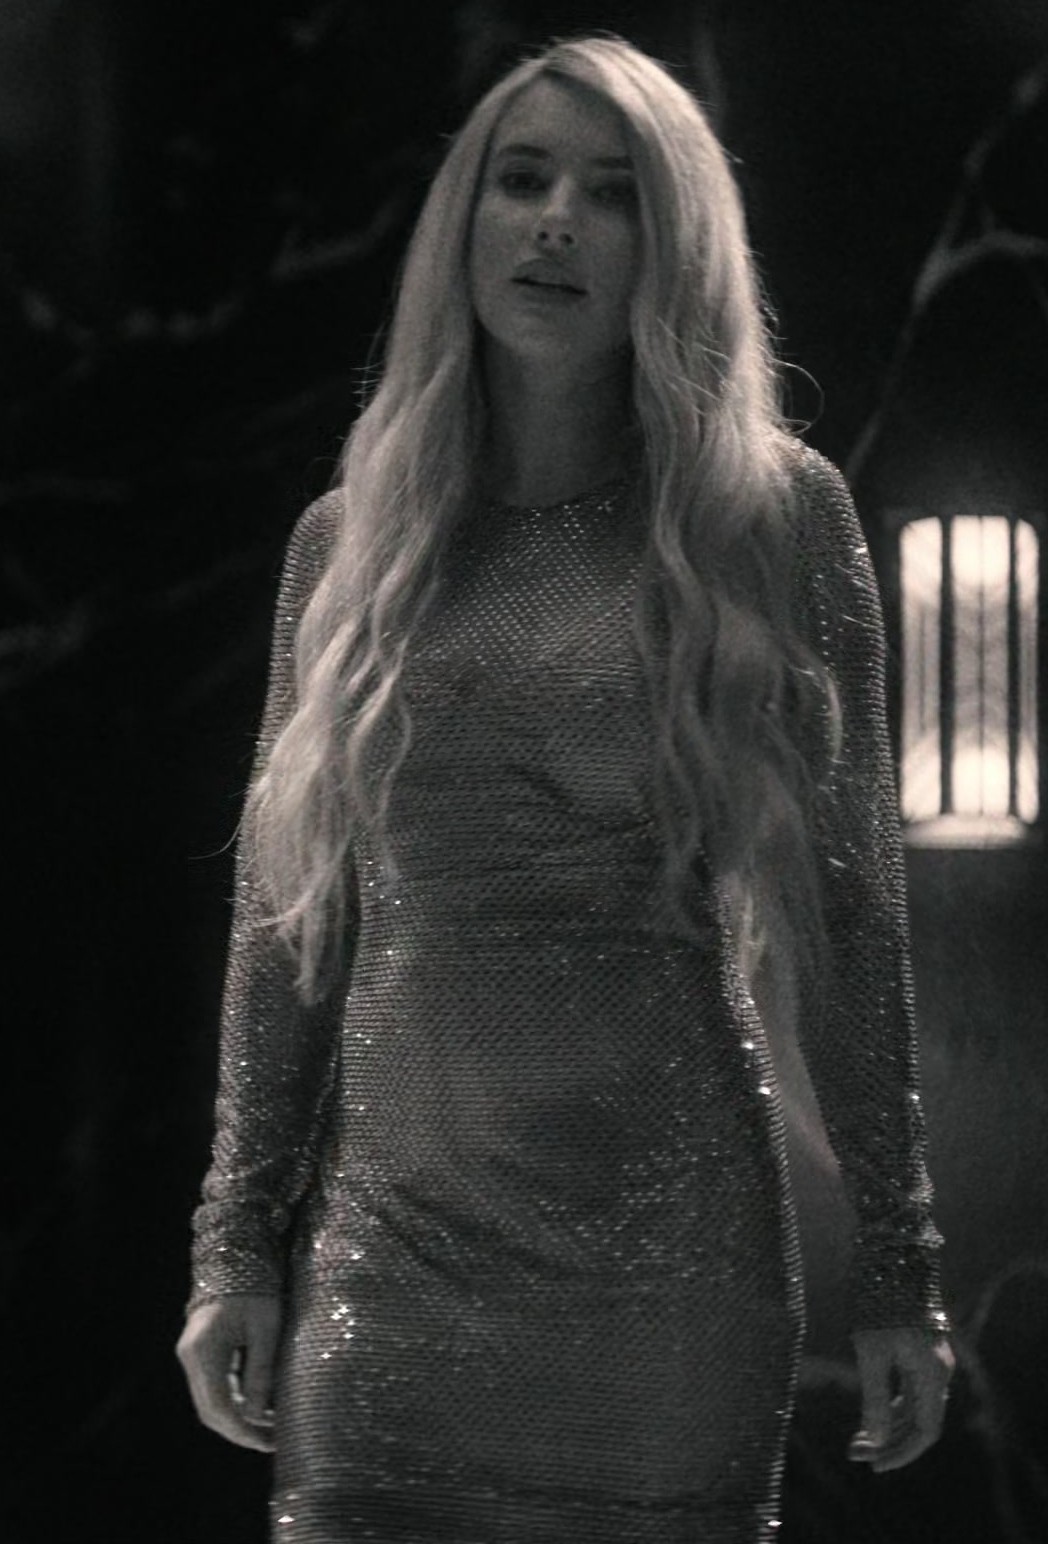 Worn on American Horror Story TV Show - Silver Sequined Mesh Long-Sleeve Dress Worn by Emma Roberts as Anna Victoria Alcott